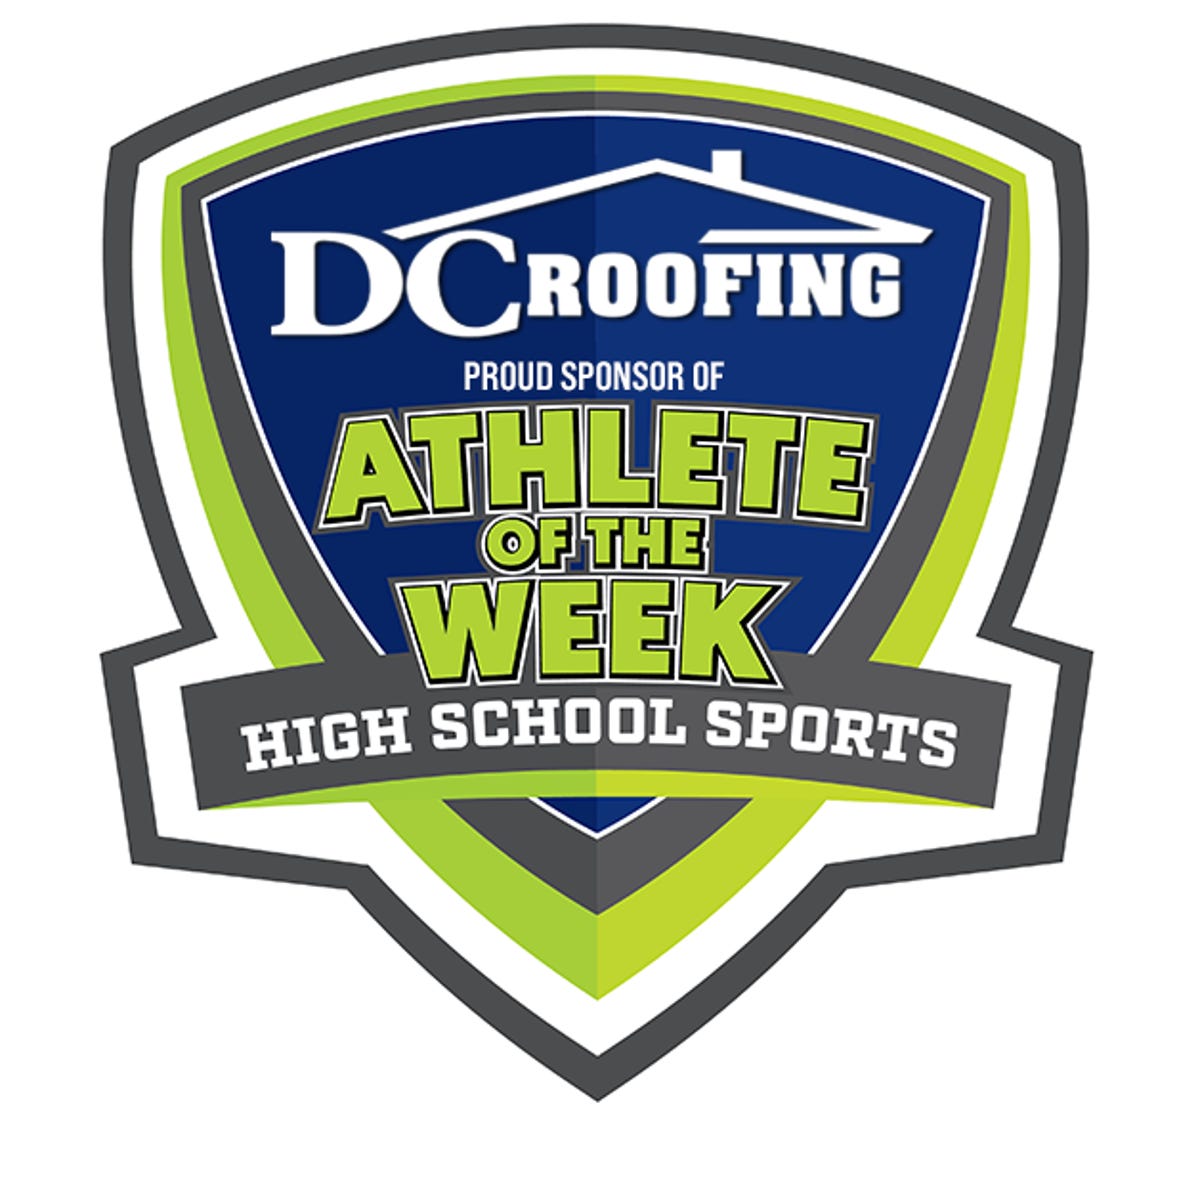 Top Performers Nominated for DC Roofing 321preps Athlete of the Week, March 11-16